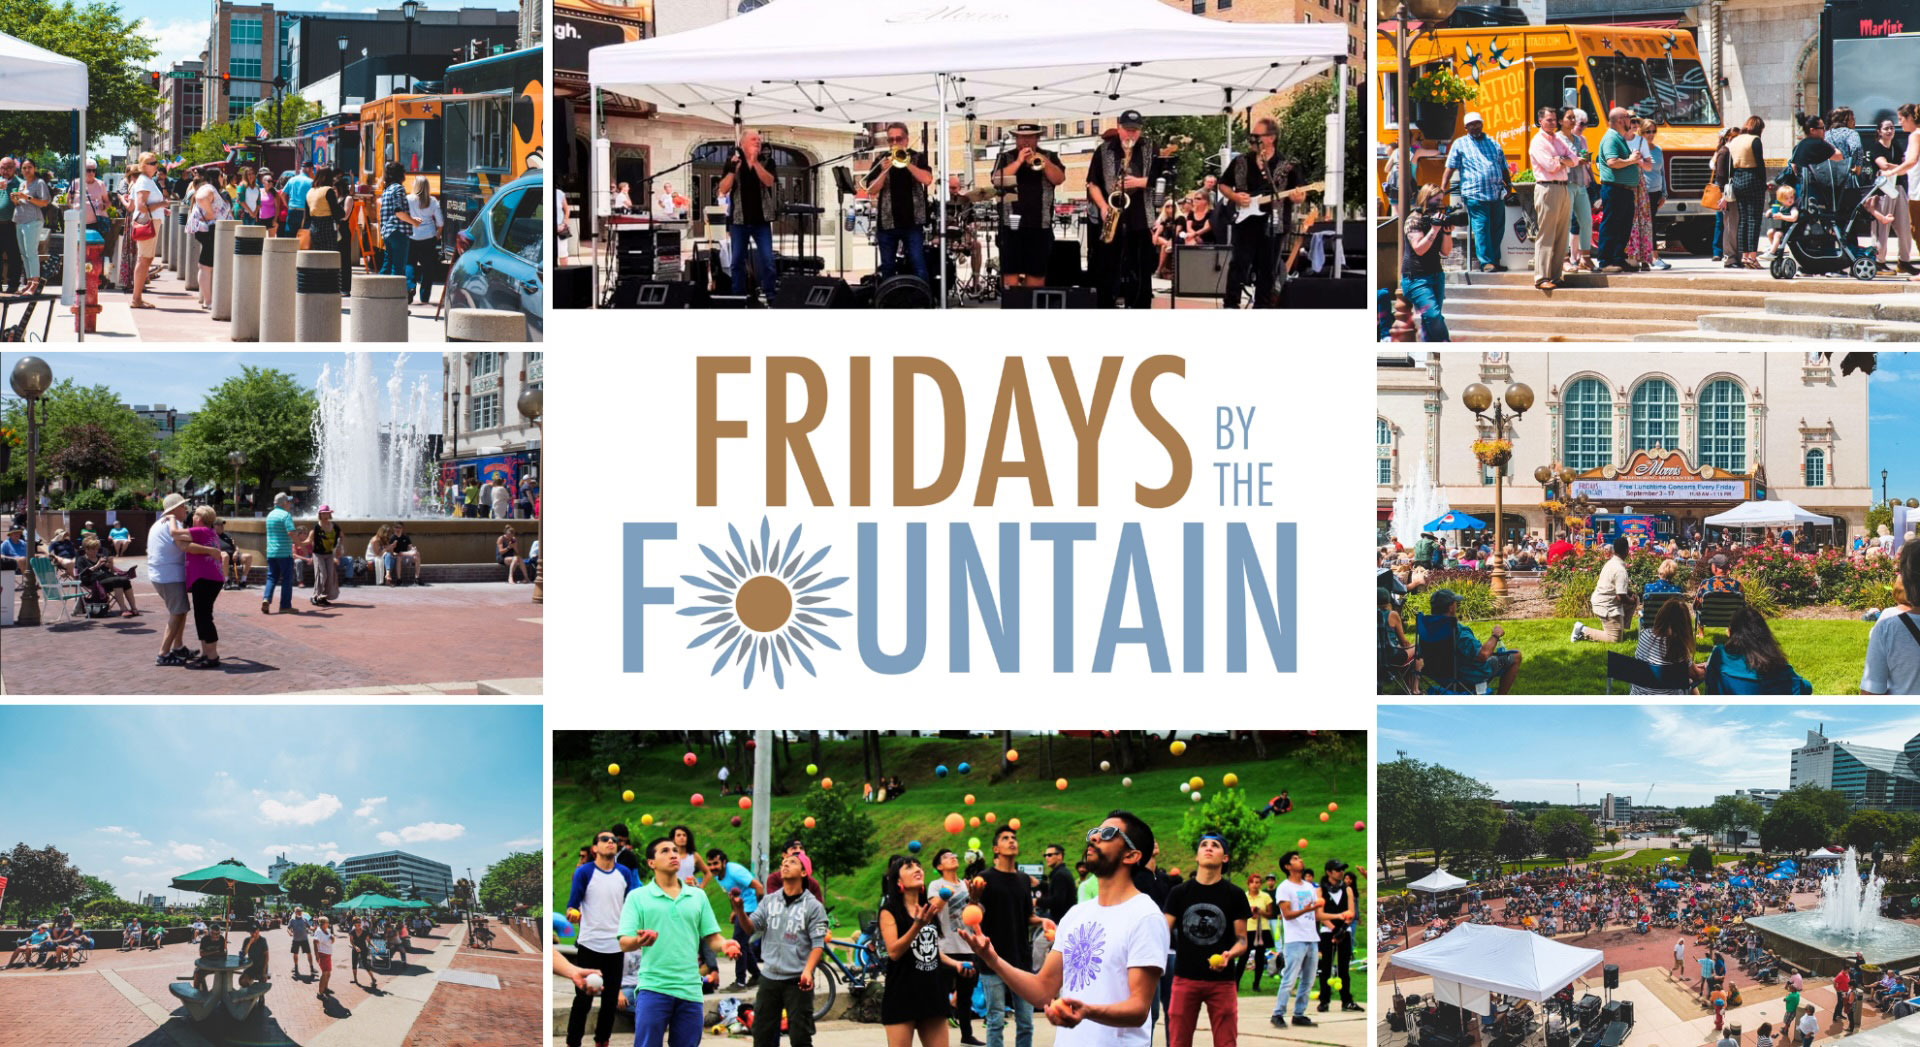 Fridays by the Fountaint